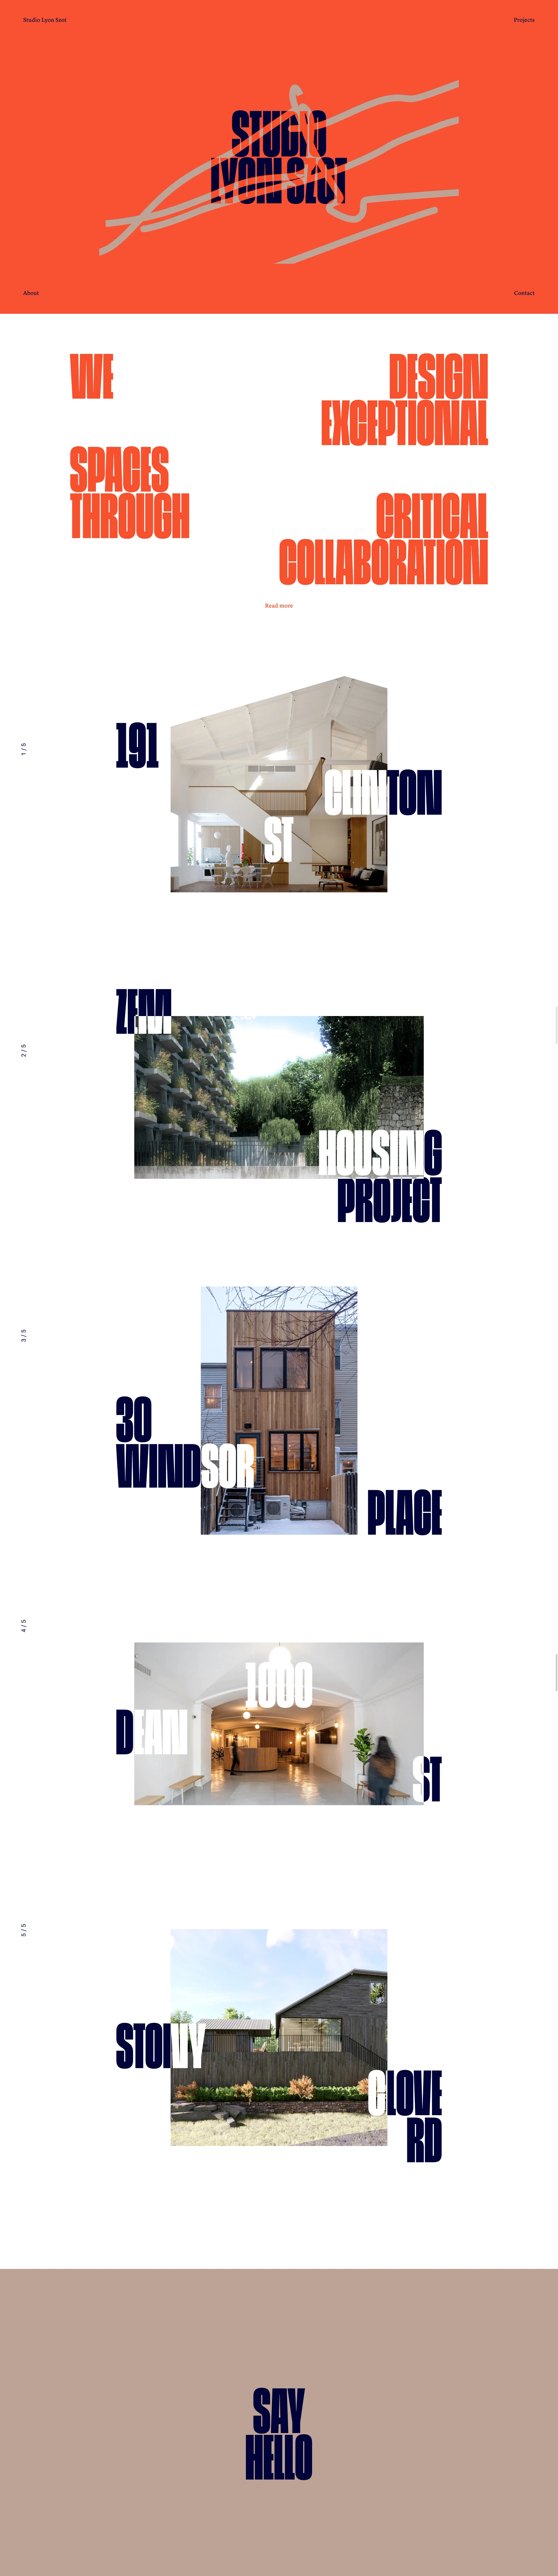 Studio Lyon Szot Landing Page Example: Architecture Studio based in Brooklyn, NY. We work with individuals, organizations, and communities to deliver projects that uncover what spaces can be.